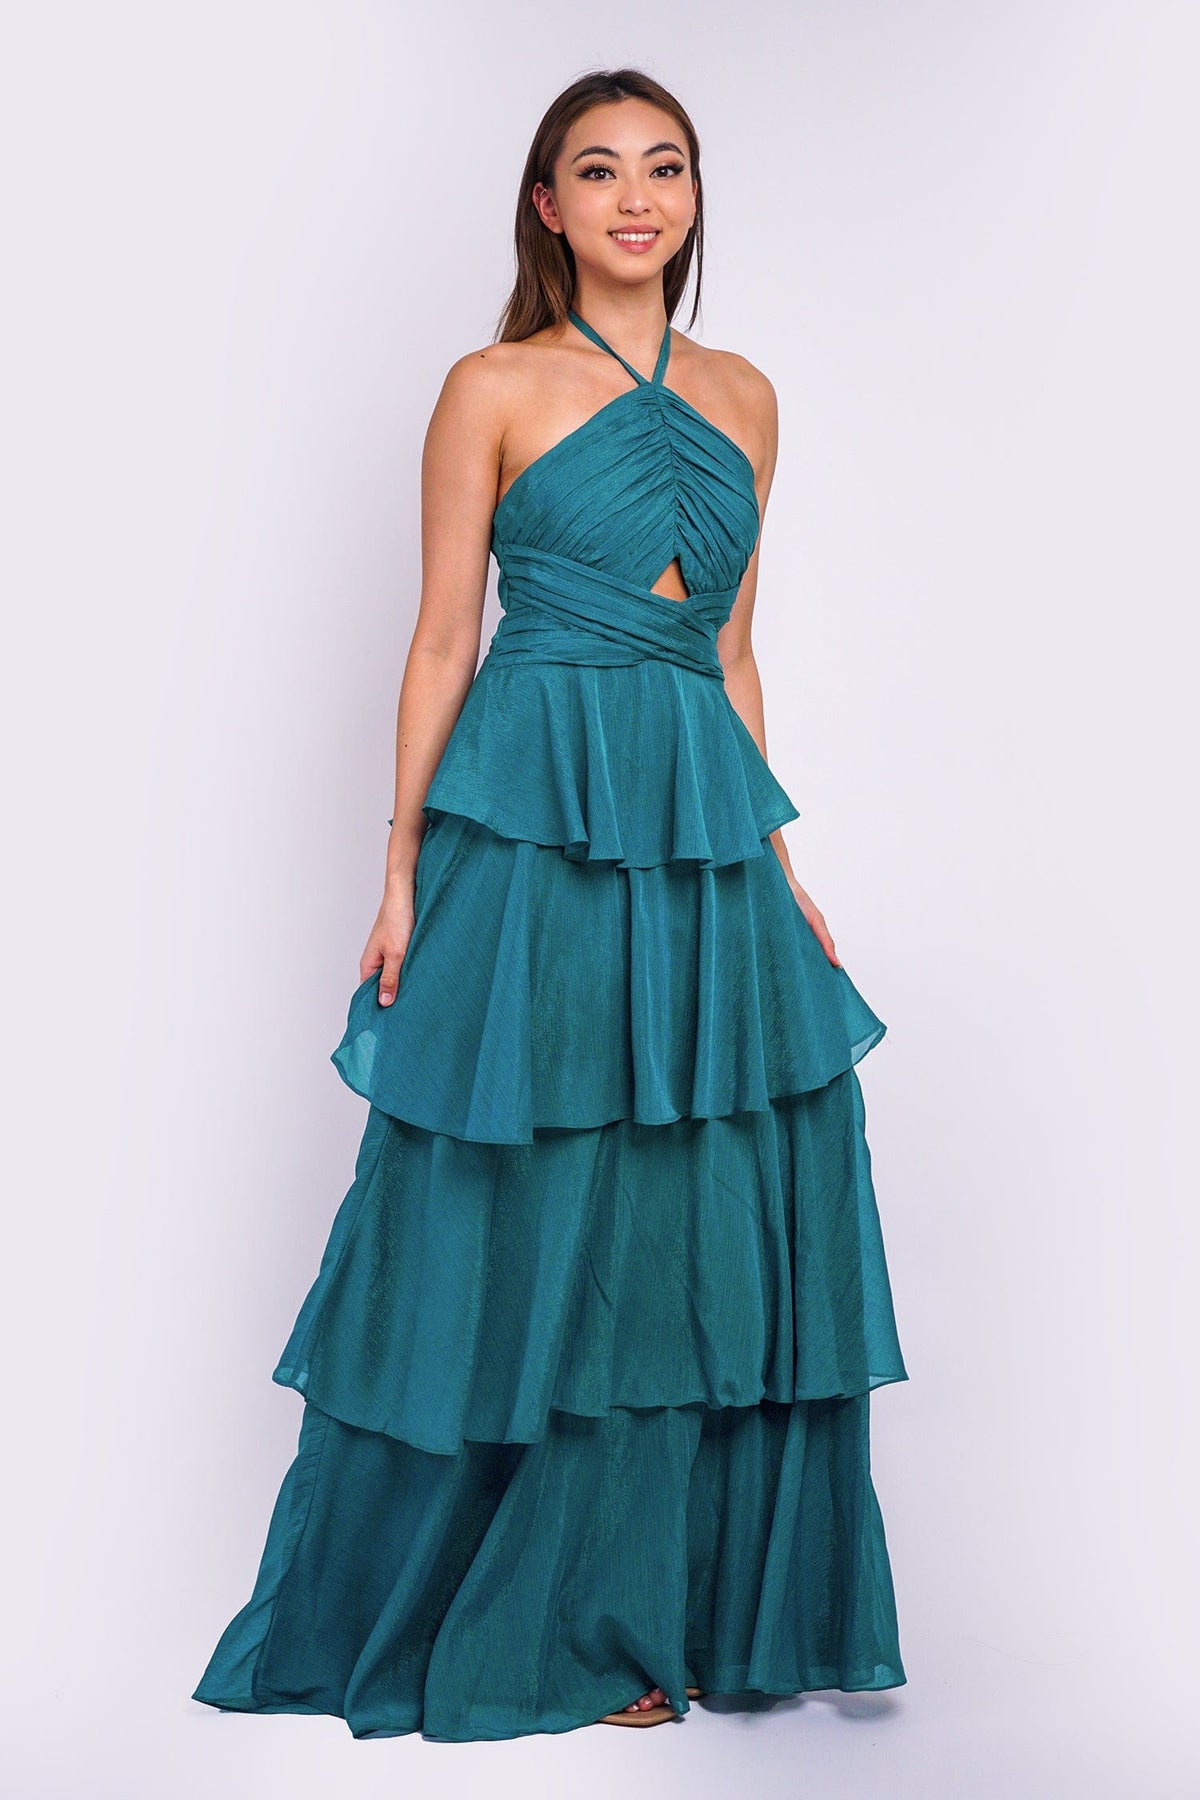 DCD GOWNS Teal Halter 4 Tiers Gown